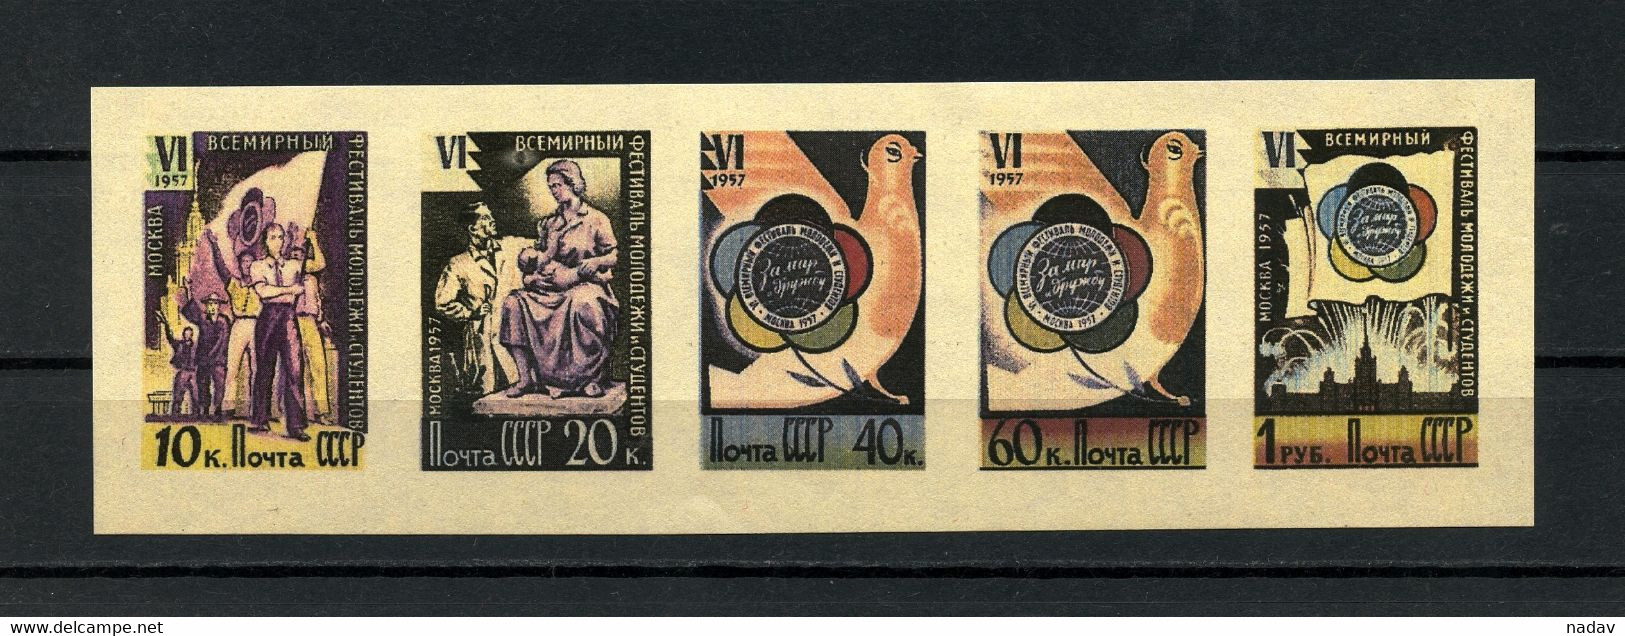 Russia & USSR-1957-  Imperforate, Reproduction - MNH** - Ensayos & Reimpresiones